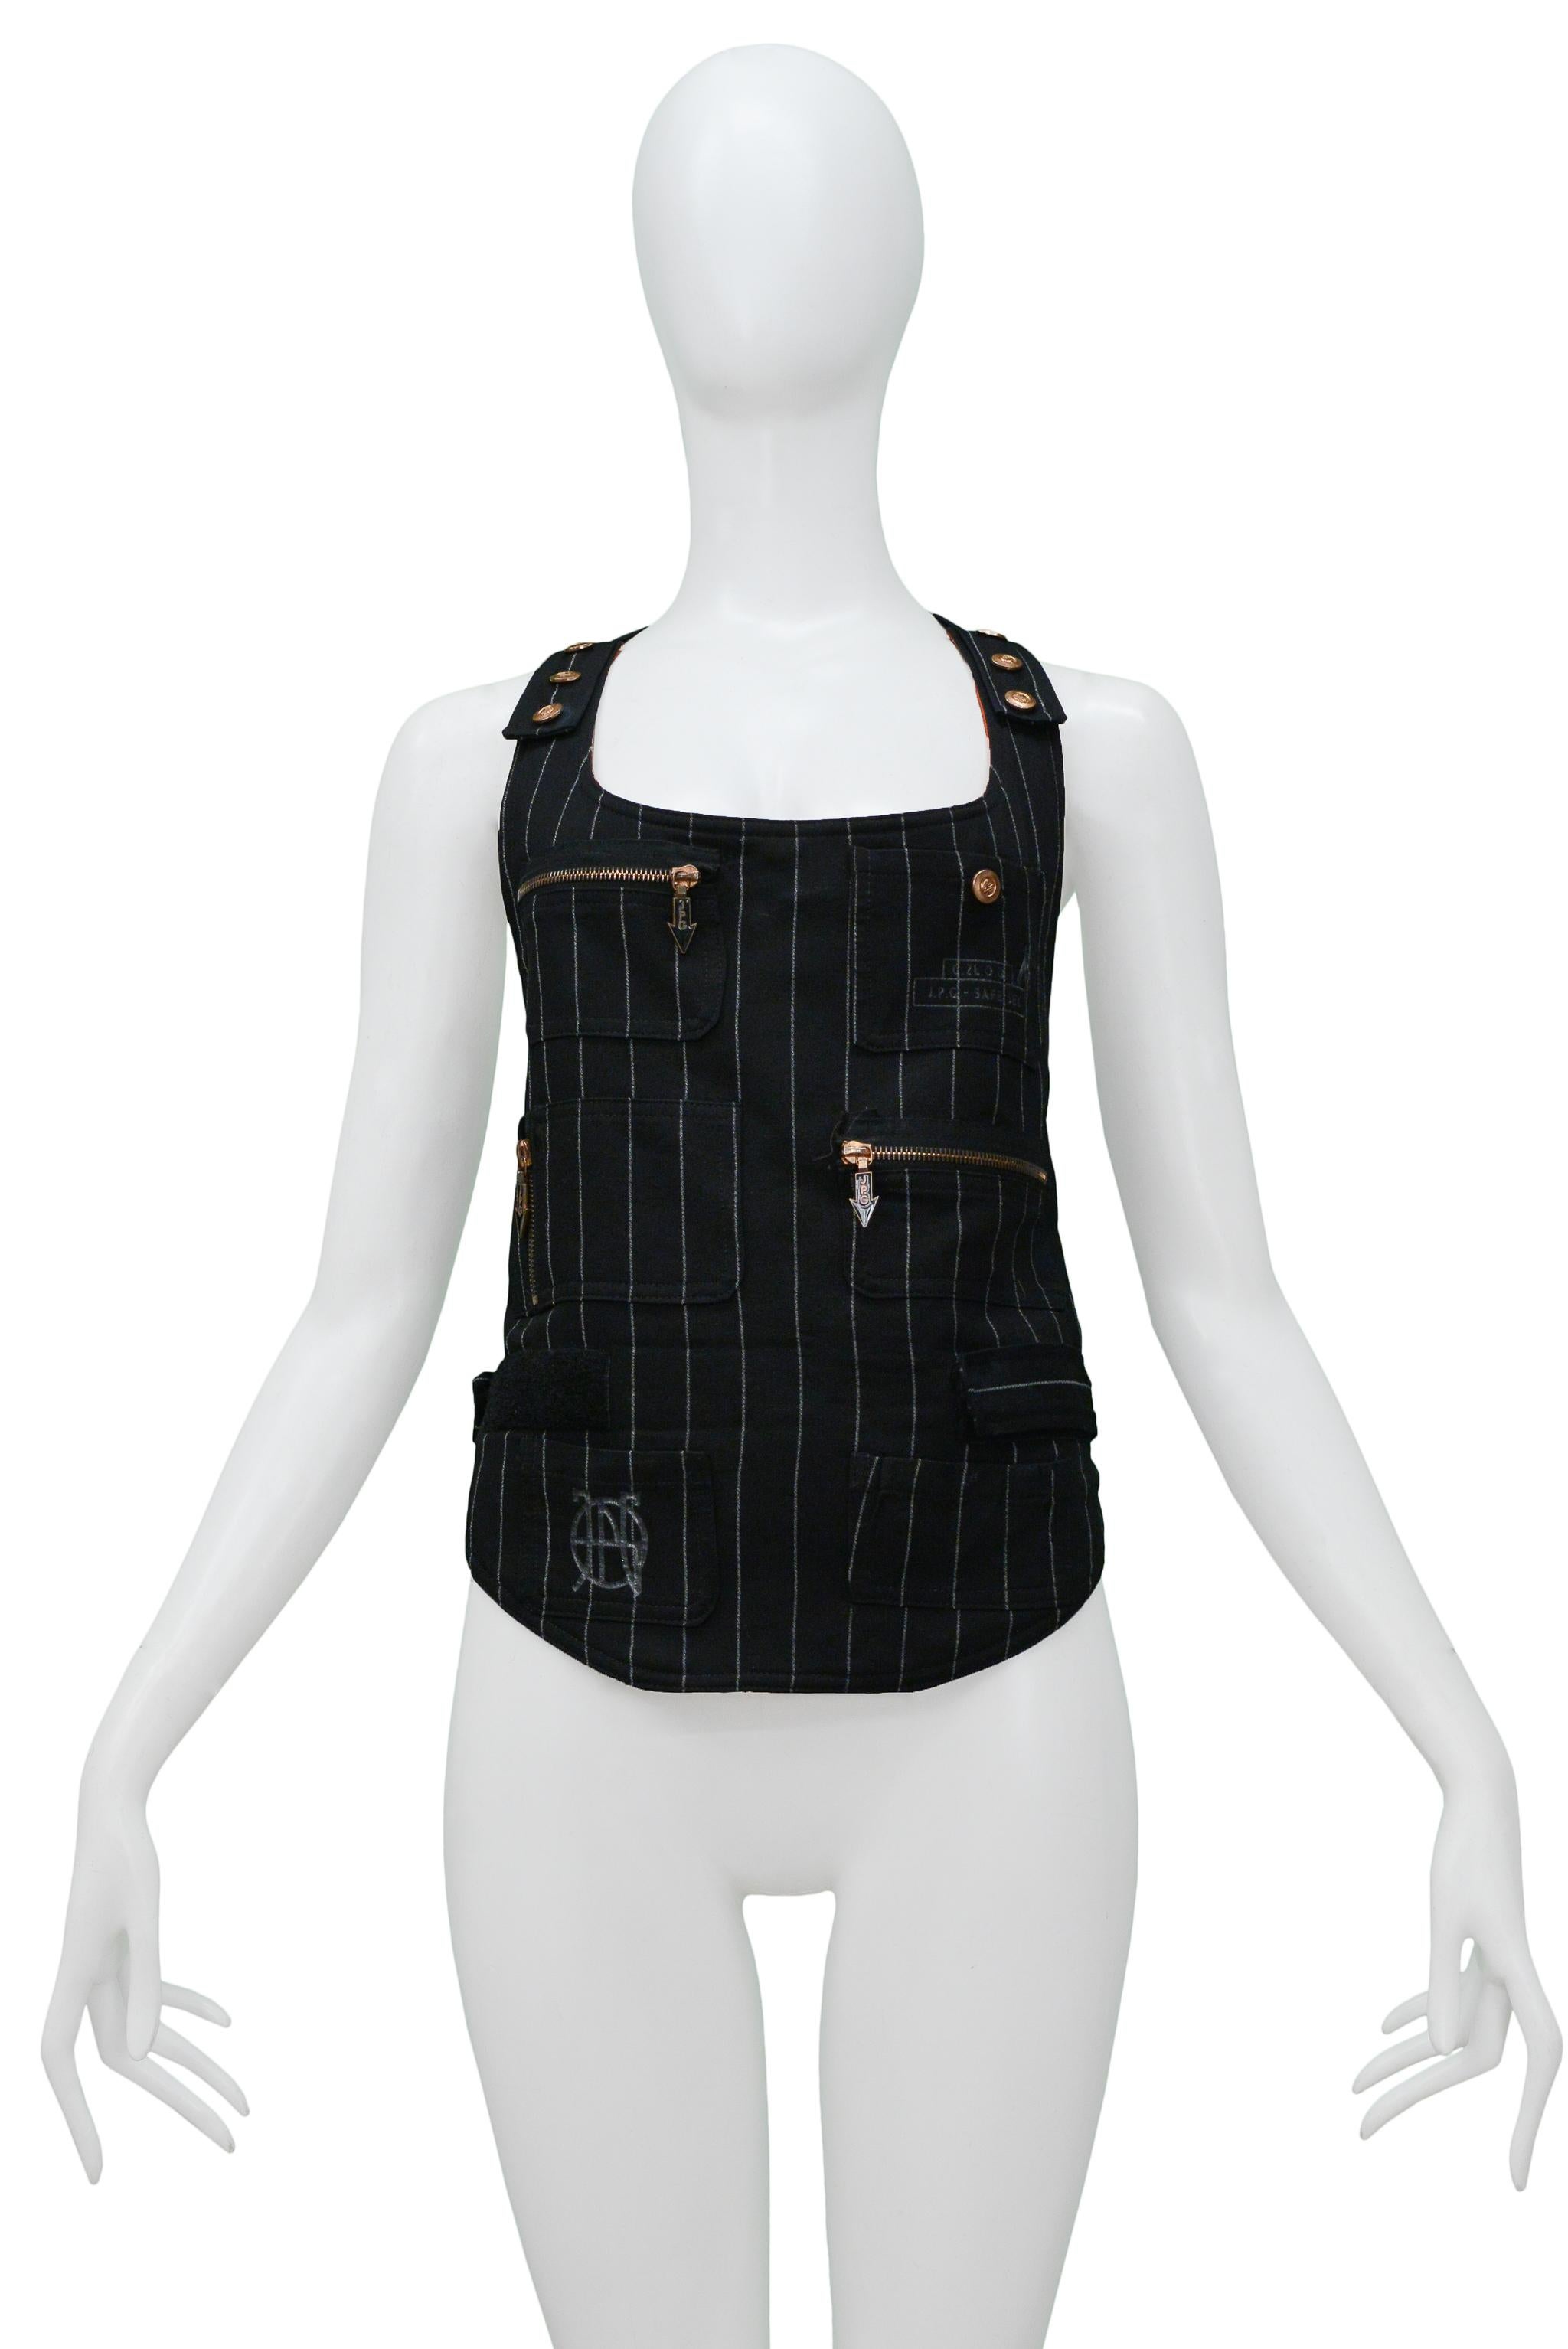 Resurrection Vintage is excited to offer a vintage Jean Paul Gaultier black and white pinstripe vest featuring zipper patch pockets, snaps along the shoulders, and a velcro strap around the waist.

Jean Paul Gaultier
Size: XL
Woven
Excellent Vintage